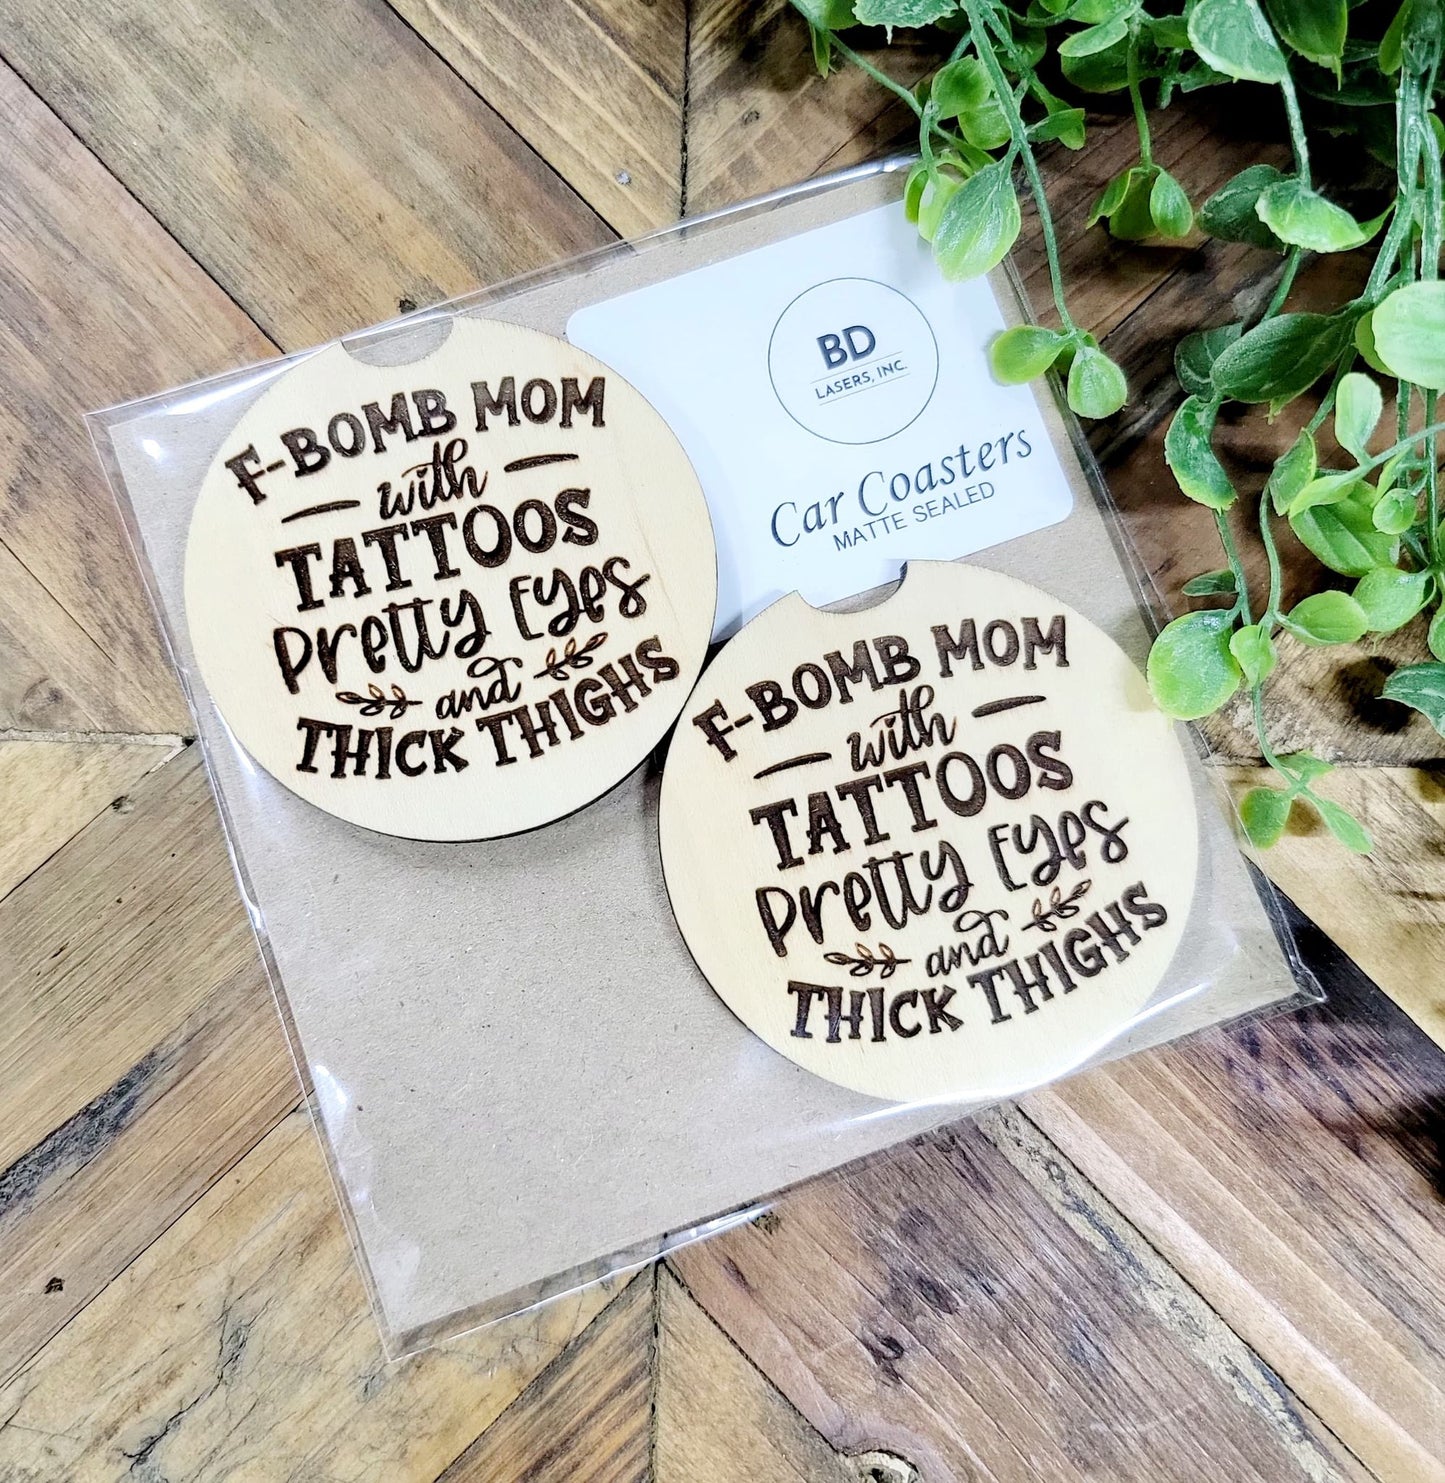 Tattoo Mom Thick Thighs Car Coasters, Set of 2 by BD Lasers, INC. - gift